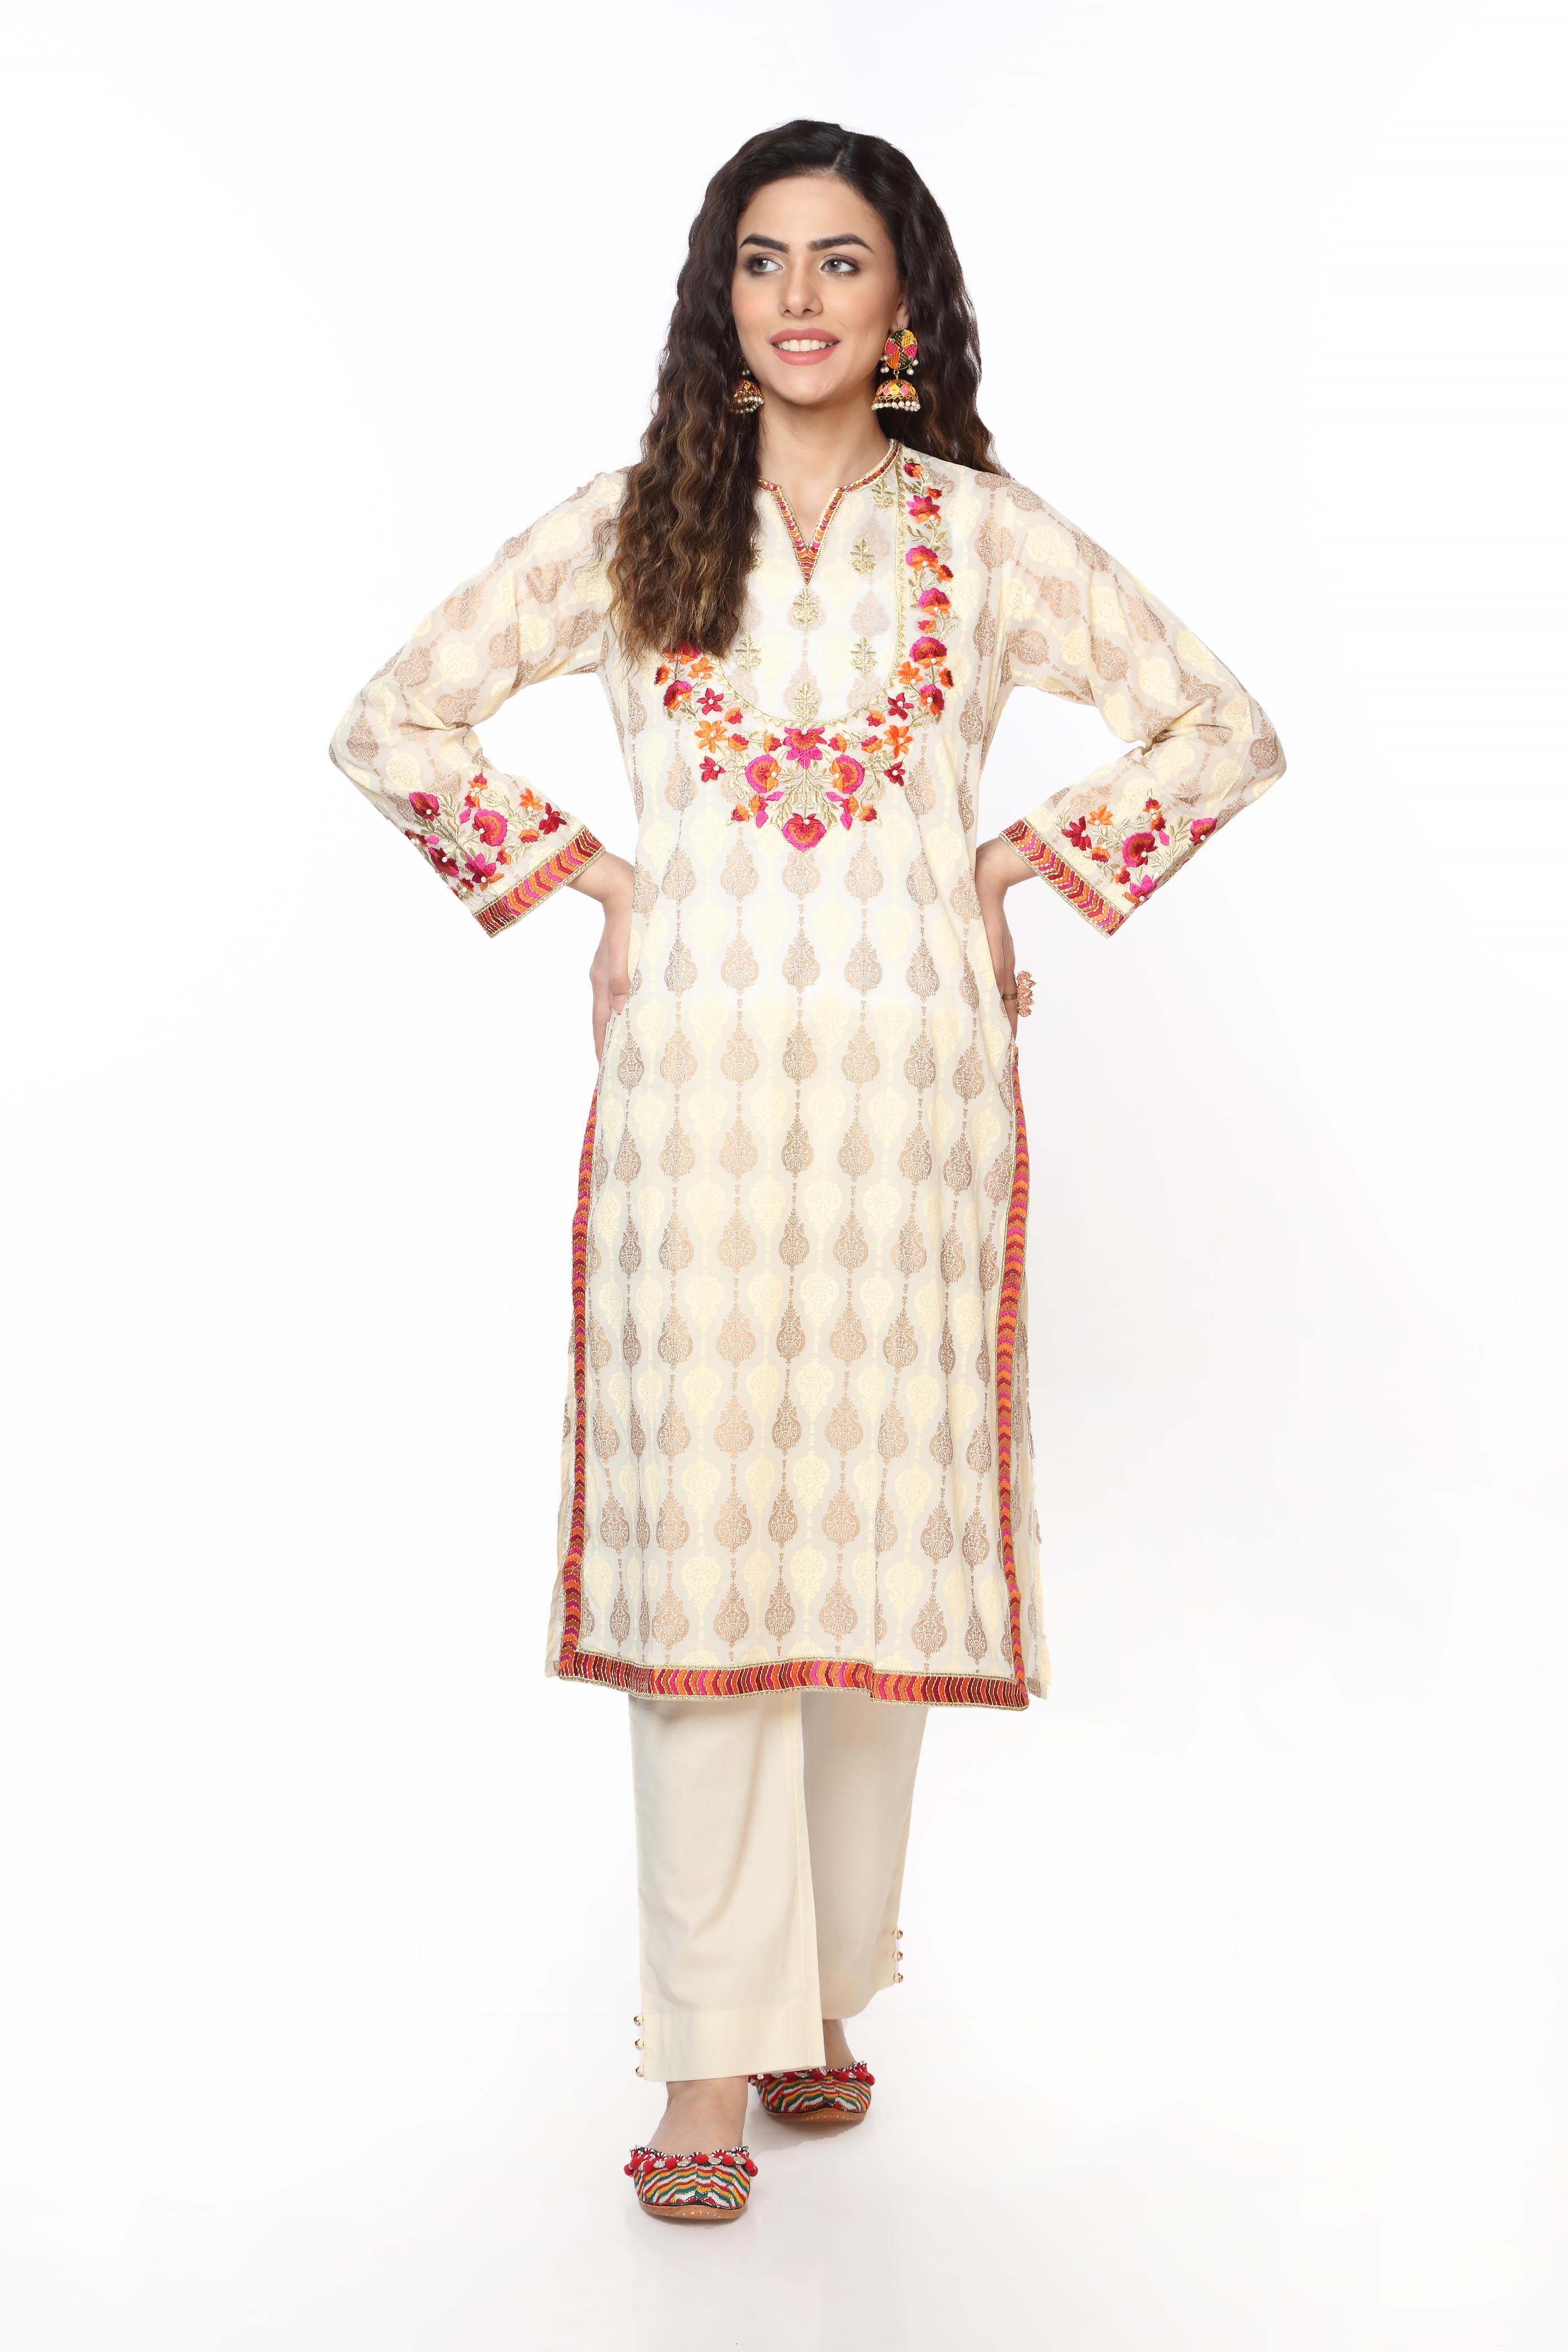 Pearl Phool in Off White coloured Printed Lawn fabric